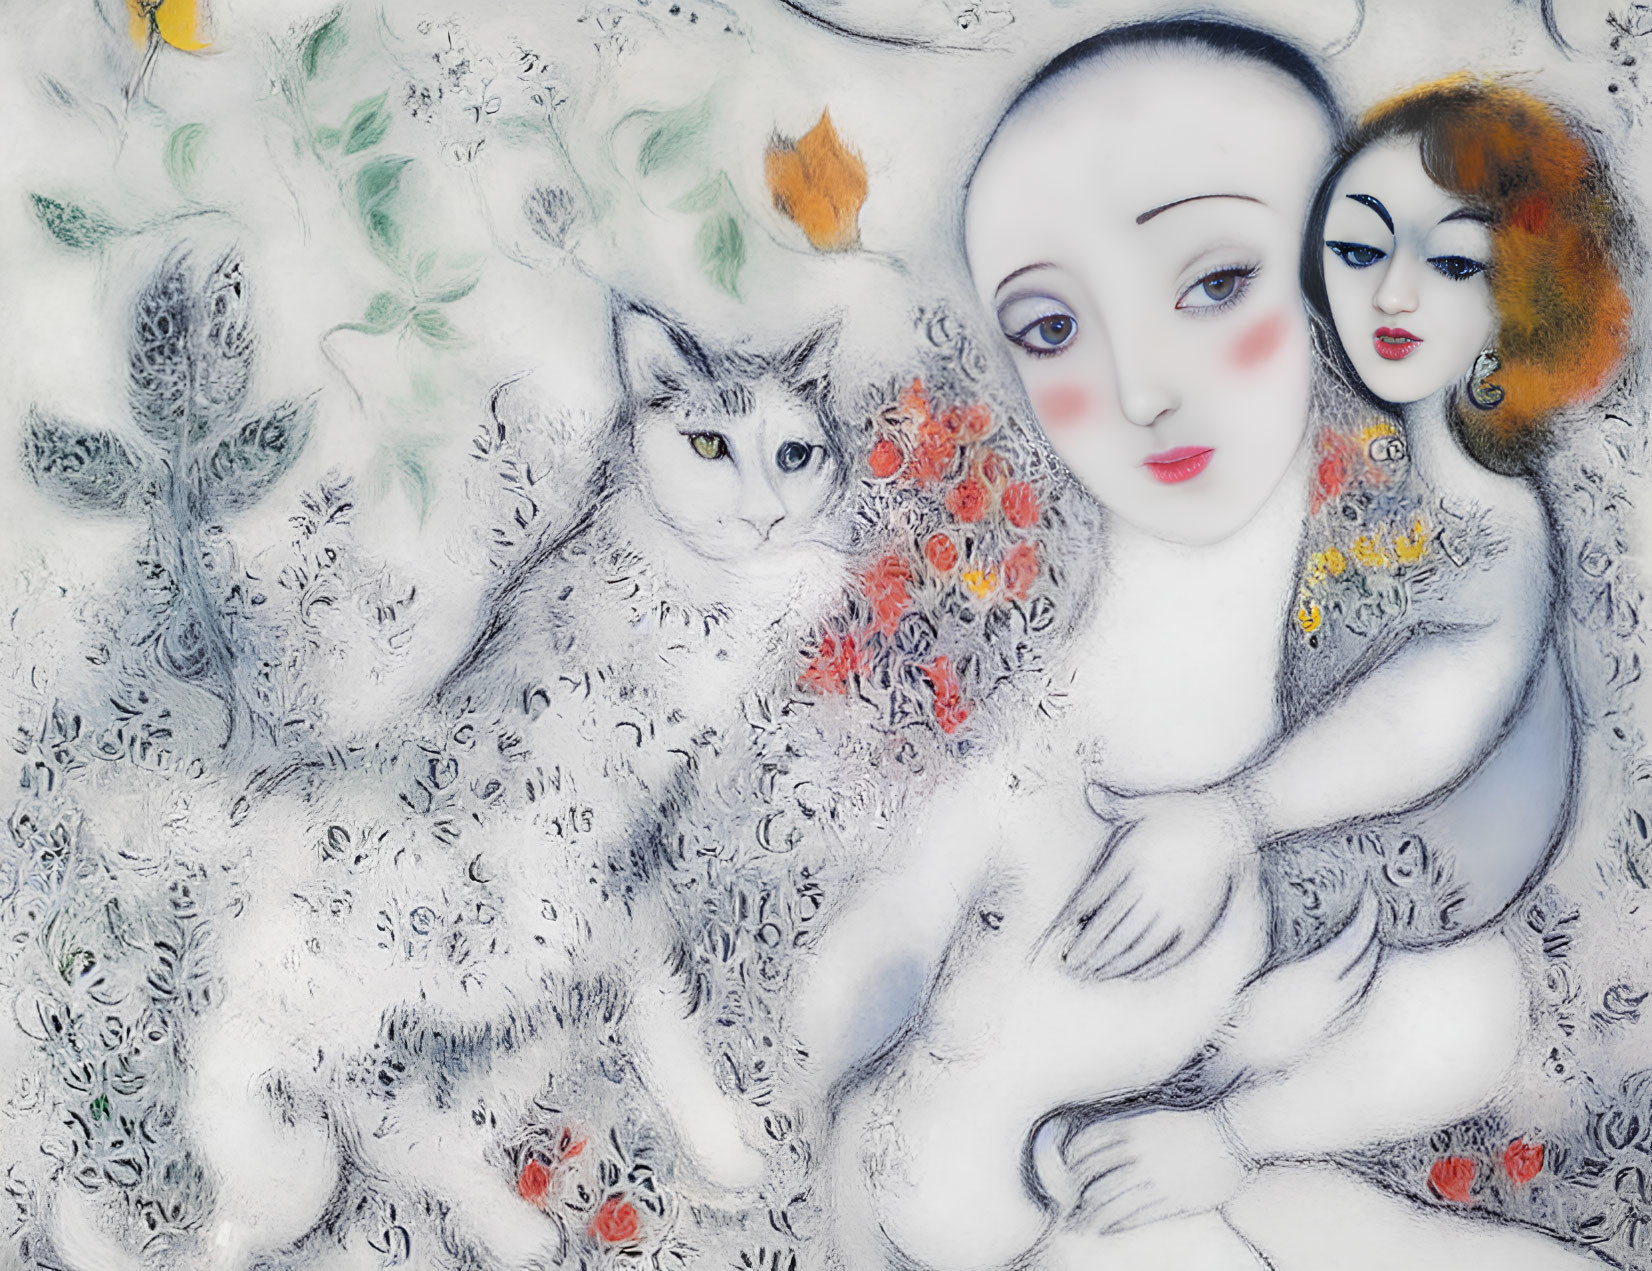 Surreal painting featuring expressive eyes, rosy-cheeked figures, and a cat in floral